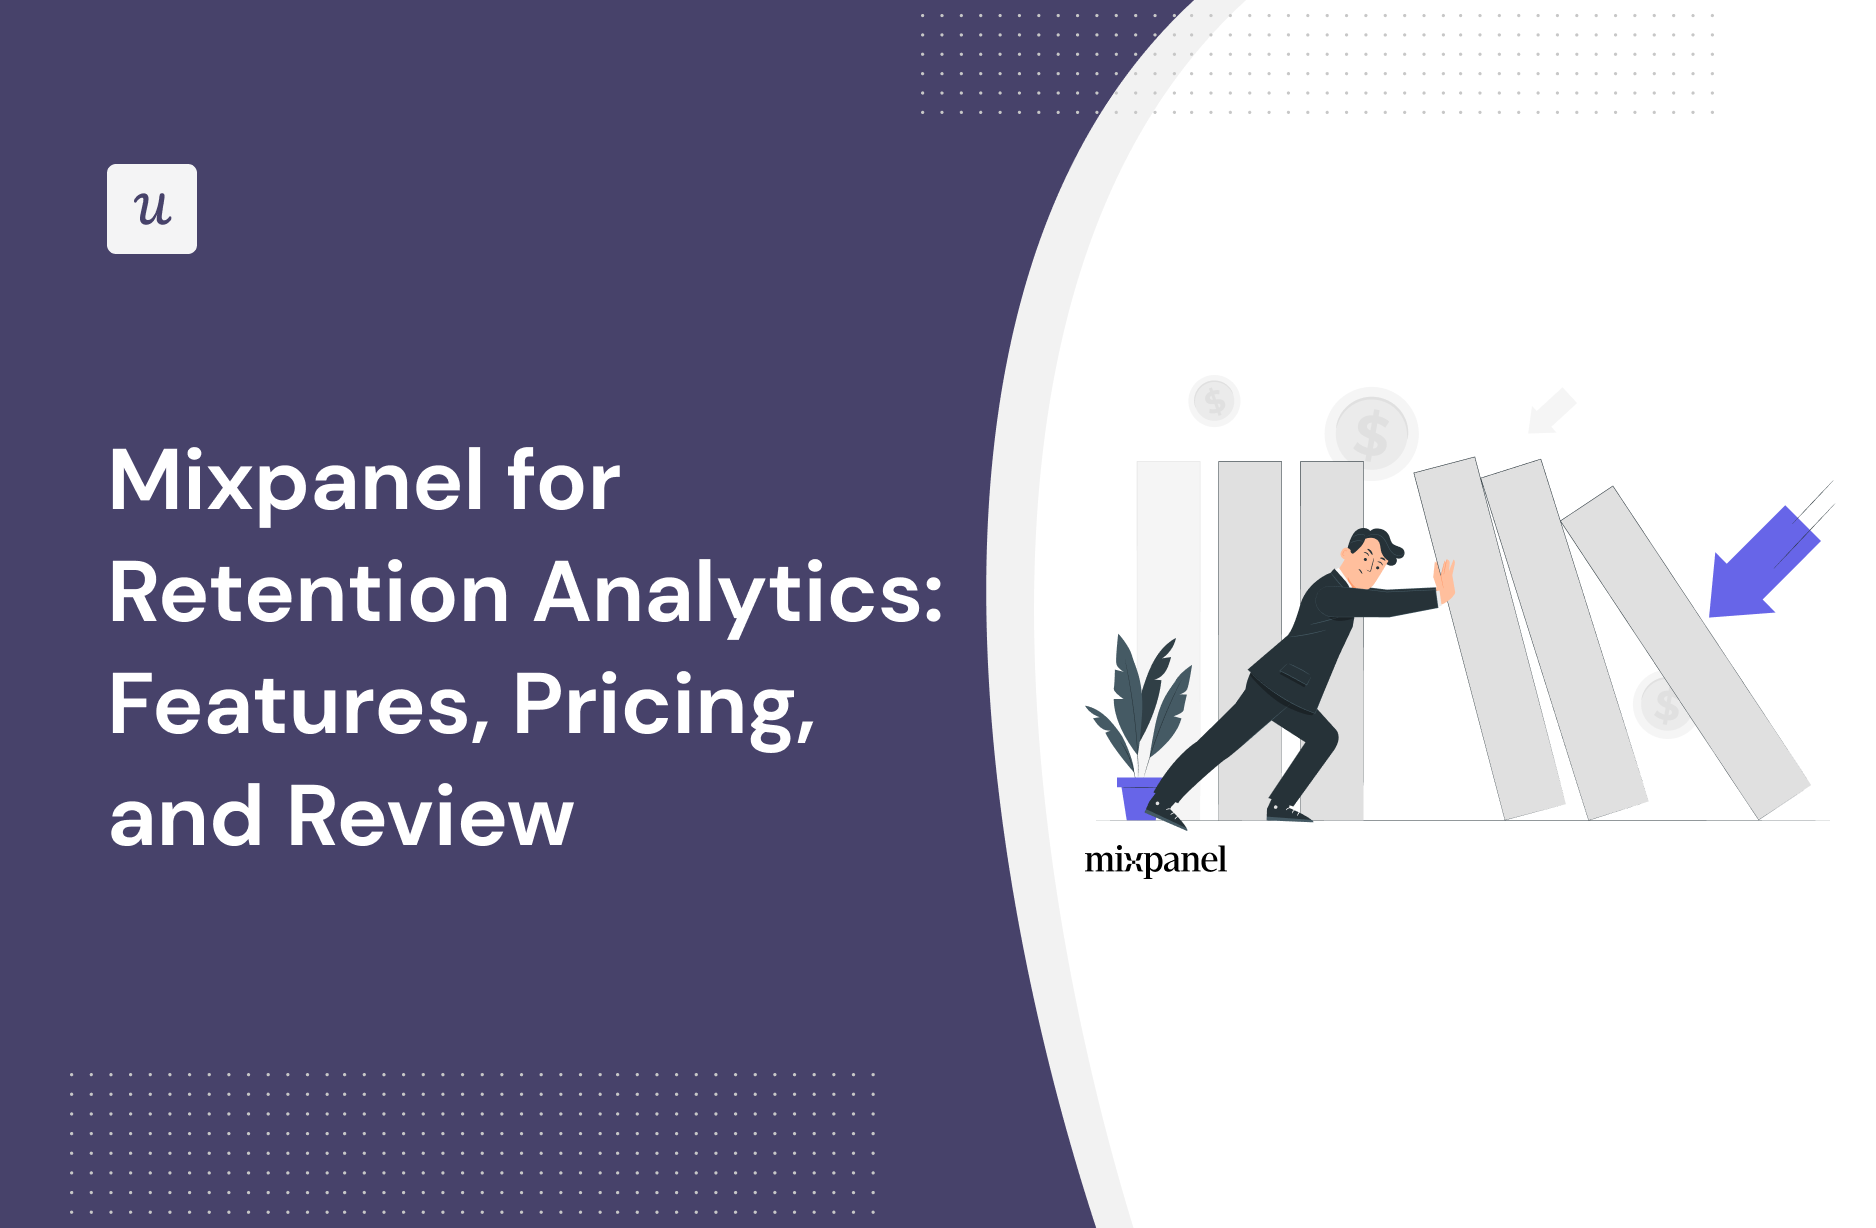 Mixpanel for Retention Analytics: Features, Pricing, and Review